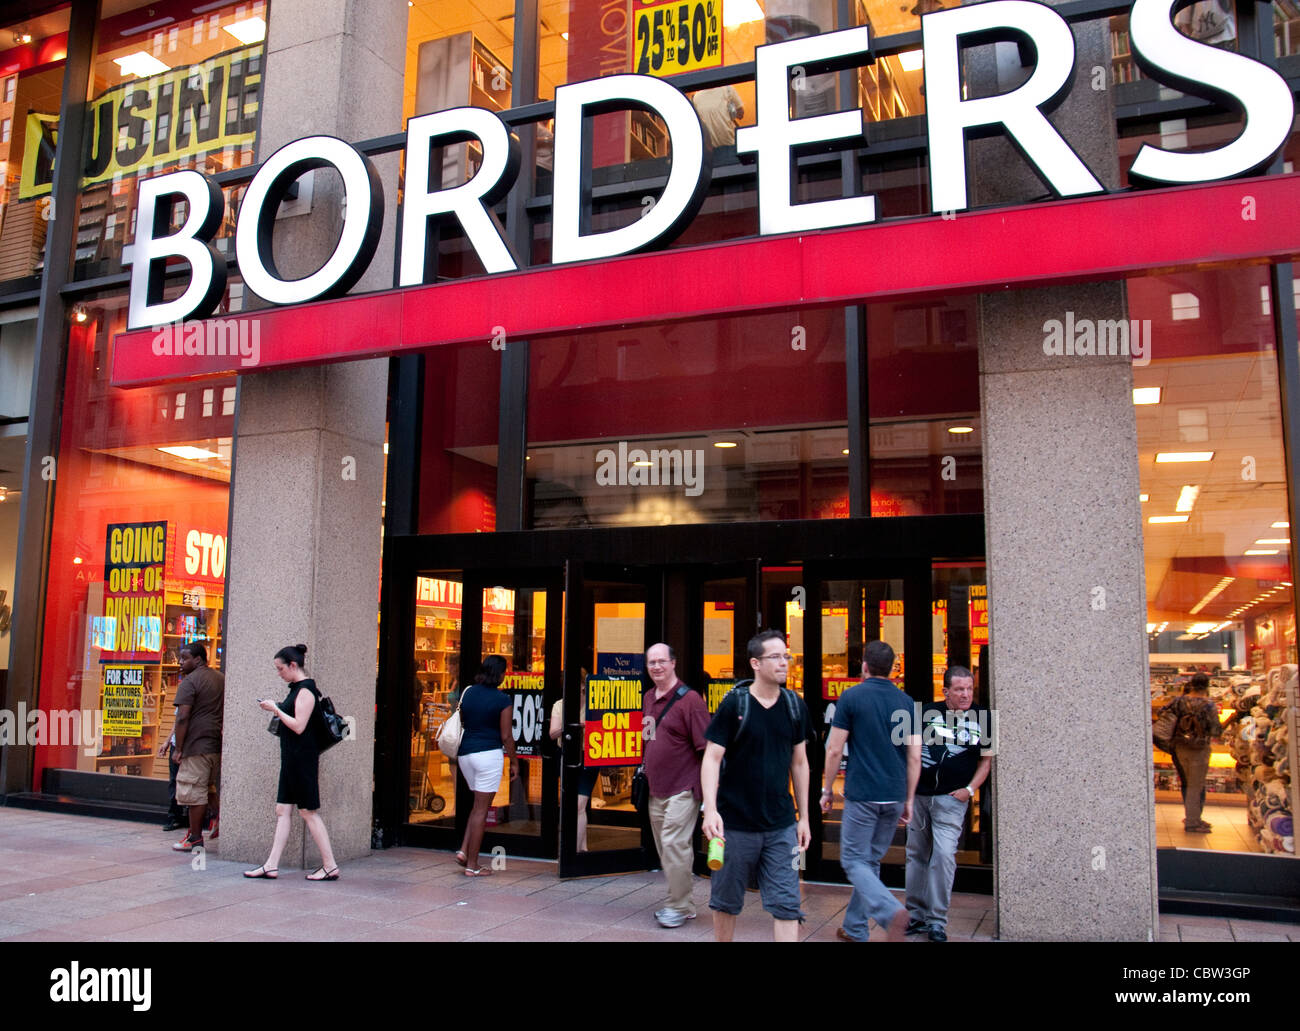 Borders book store during Out of Business clearance days, Stock Photo